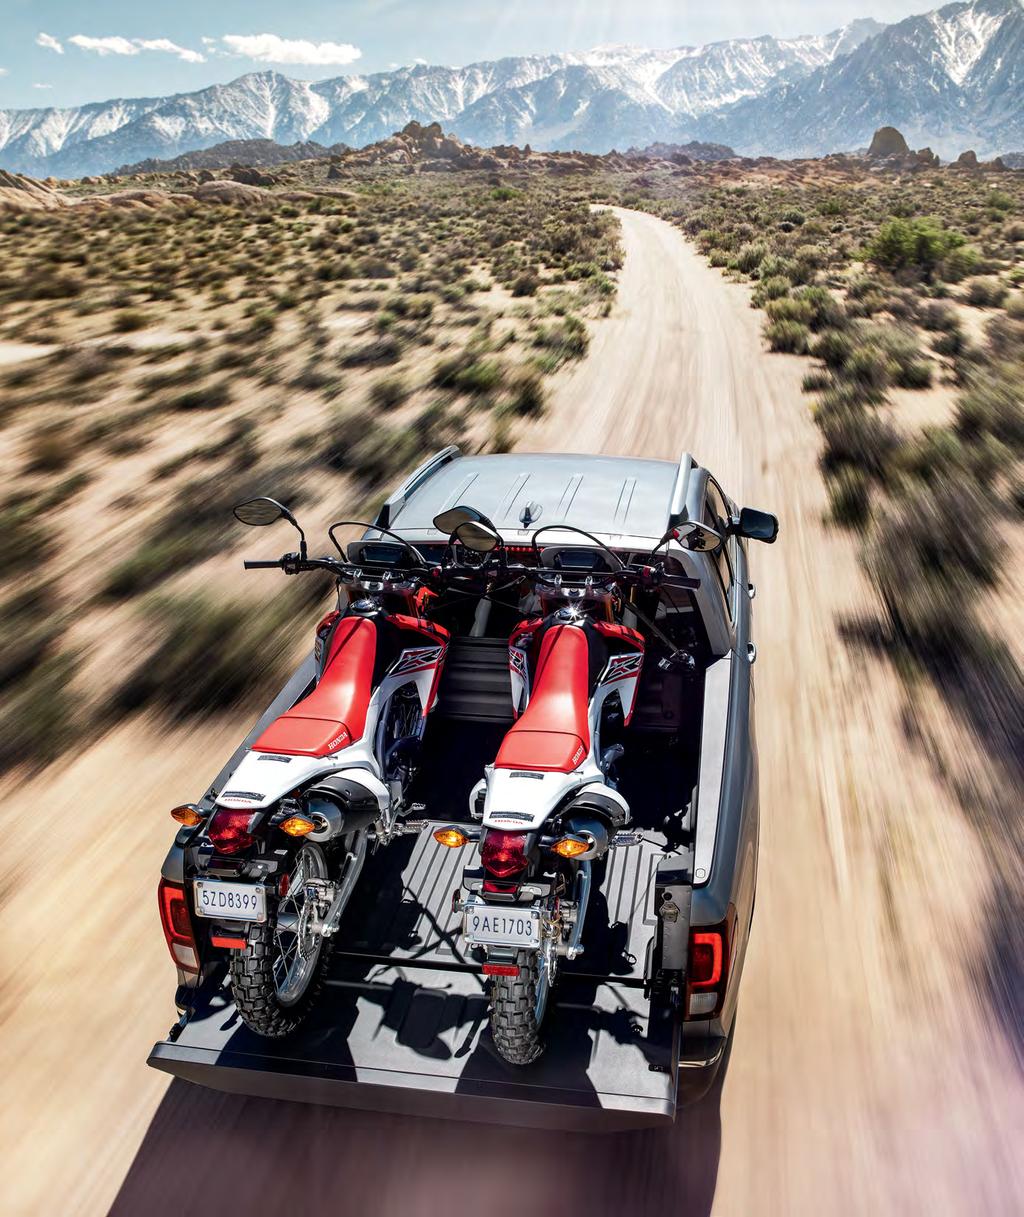 Multi-Link Rear Suspension Why rough it? The Ridgeline has a sophisticated, fully independent suspension that provides a remarkable ride quality on both dirt road and pavement.